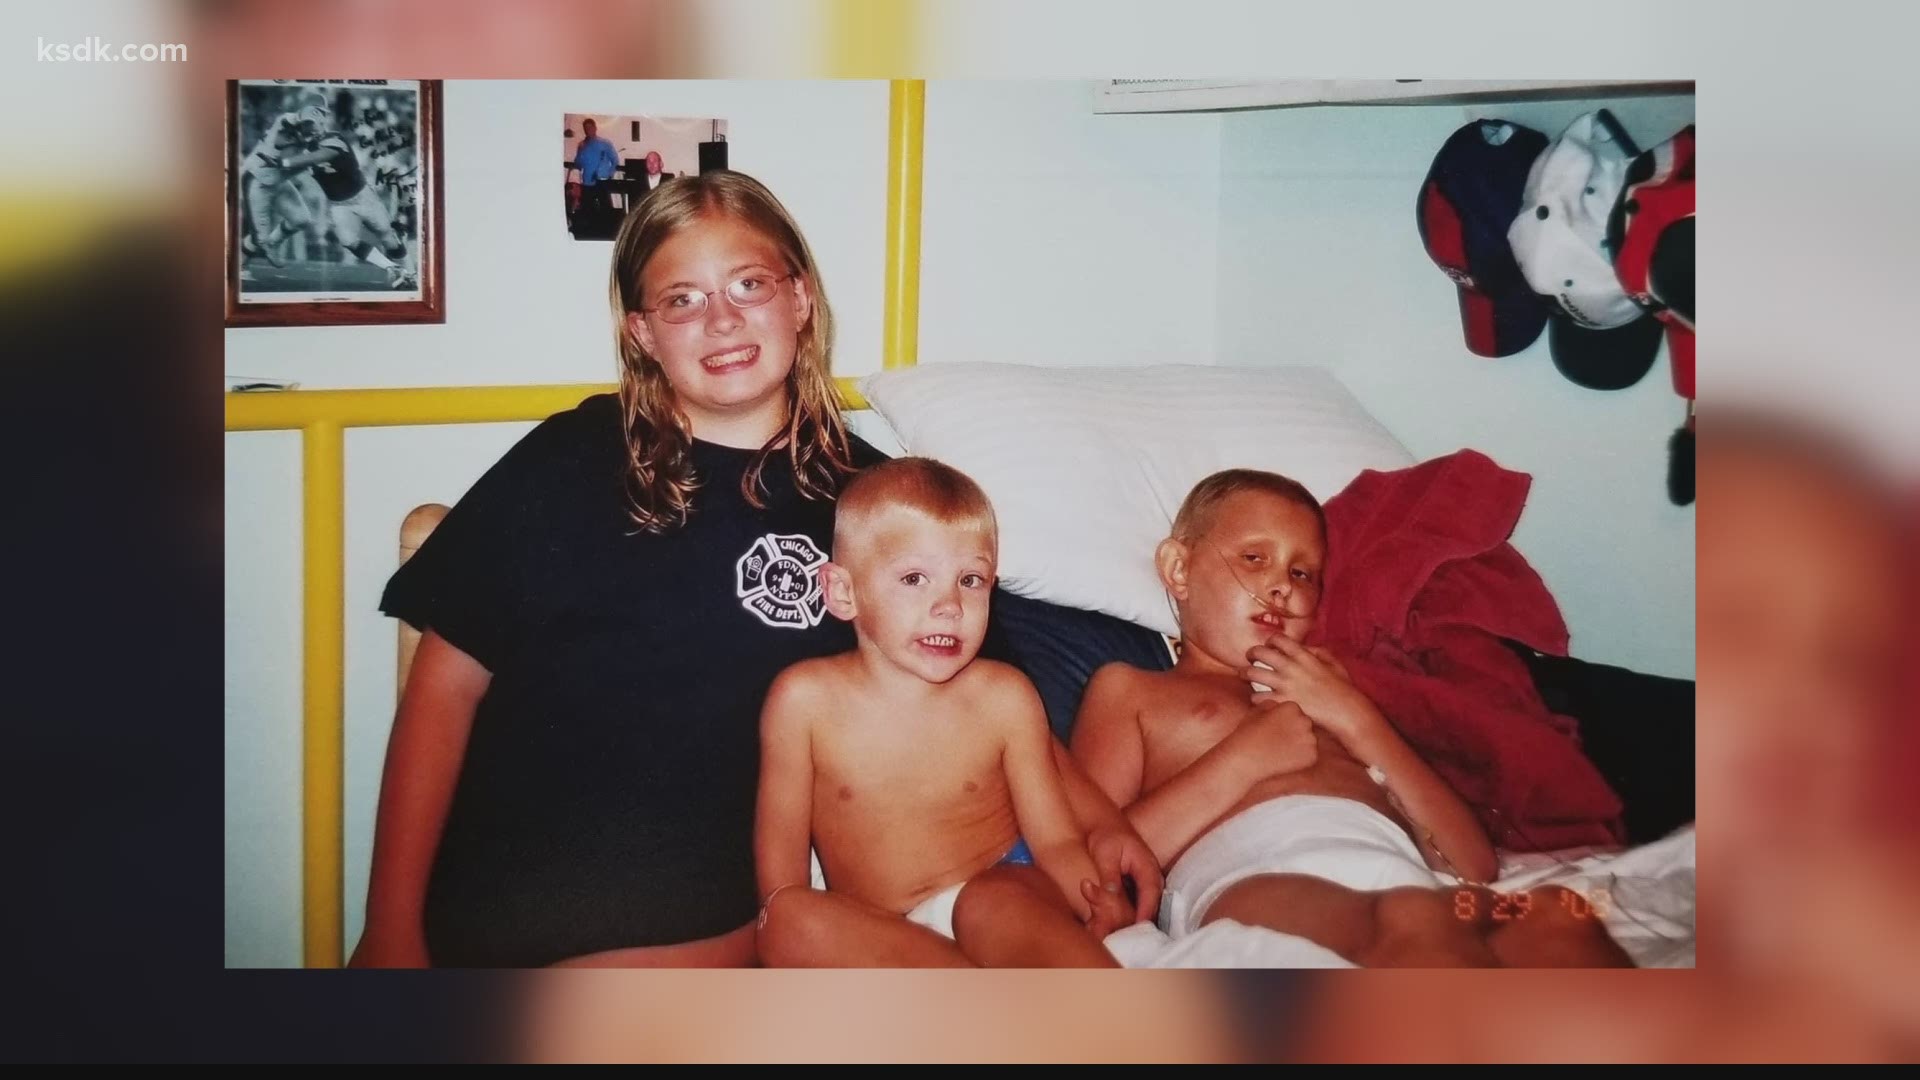 Emily Dyall is making sure her brother and the way he lived is never forgotten. She started a nonprofit in his name that's helping kids battling cancer.